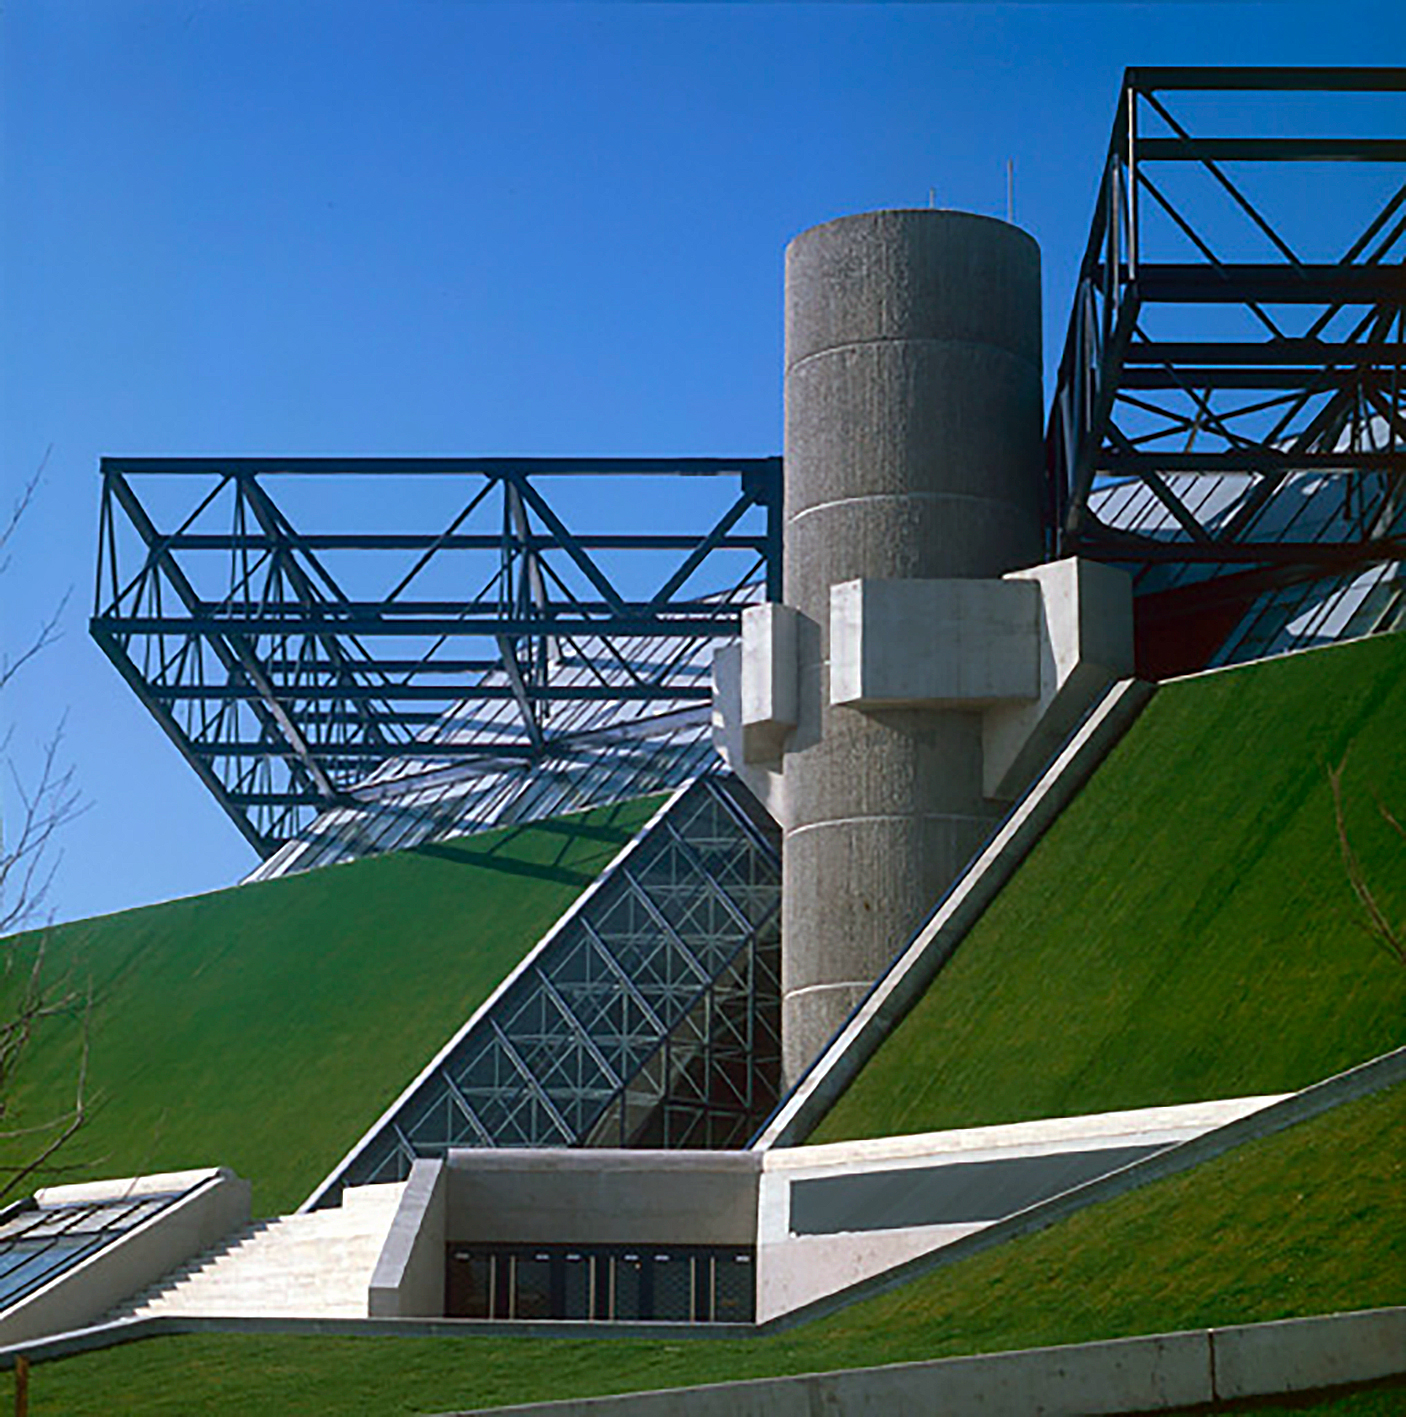 Designs the structure for the Bercy velodrome, Paris, 1976 (M. Andrault and P. Parat, architect).